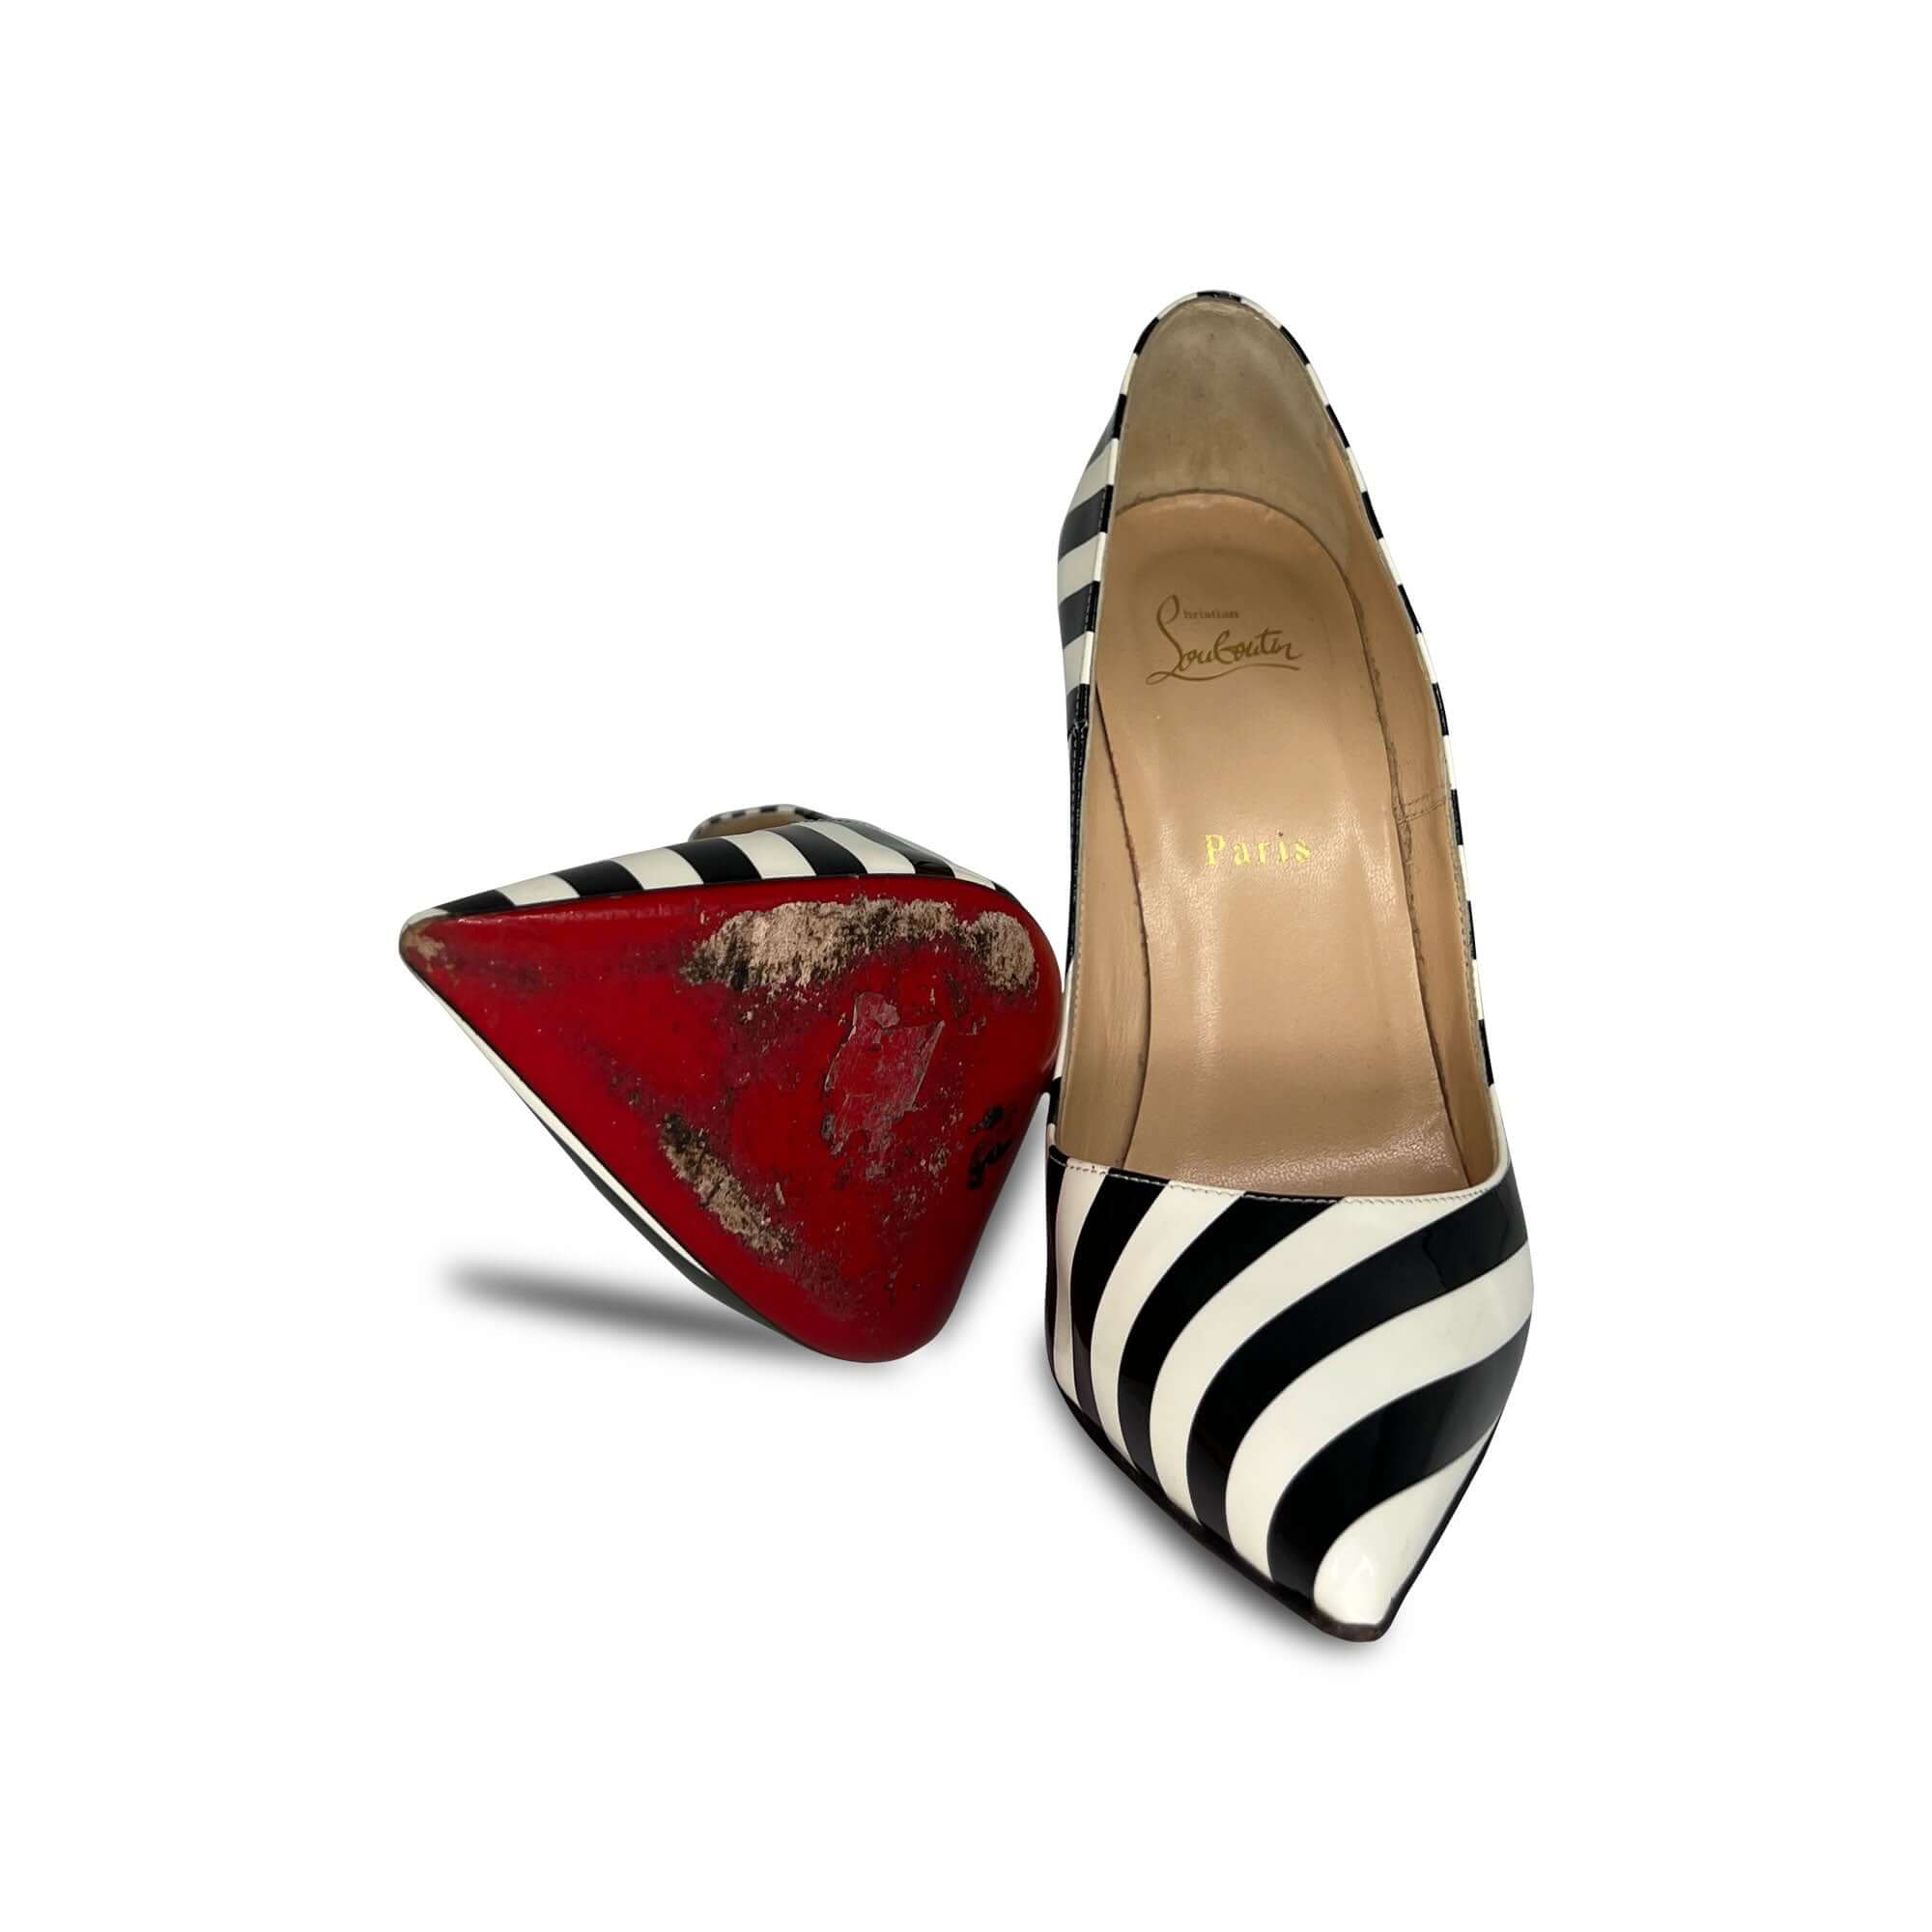 Christian Louboutin 'So Kate' 120mm stripped patent leather pumps –  VintageBooBoo Pre owned designer bags, shoes, clothes